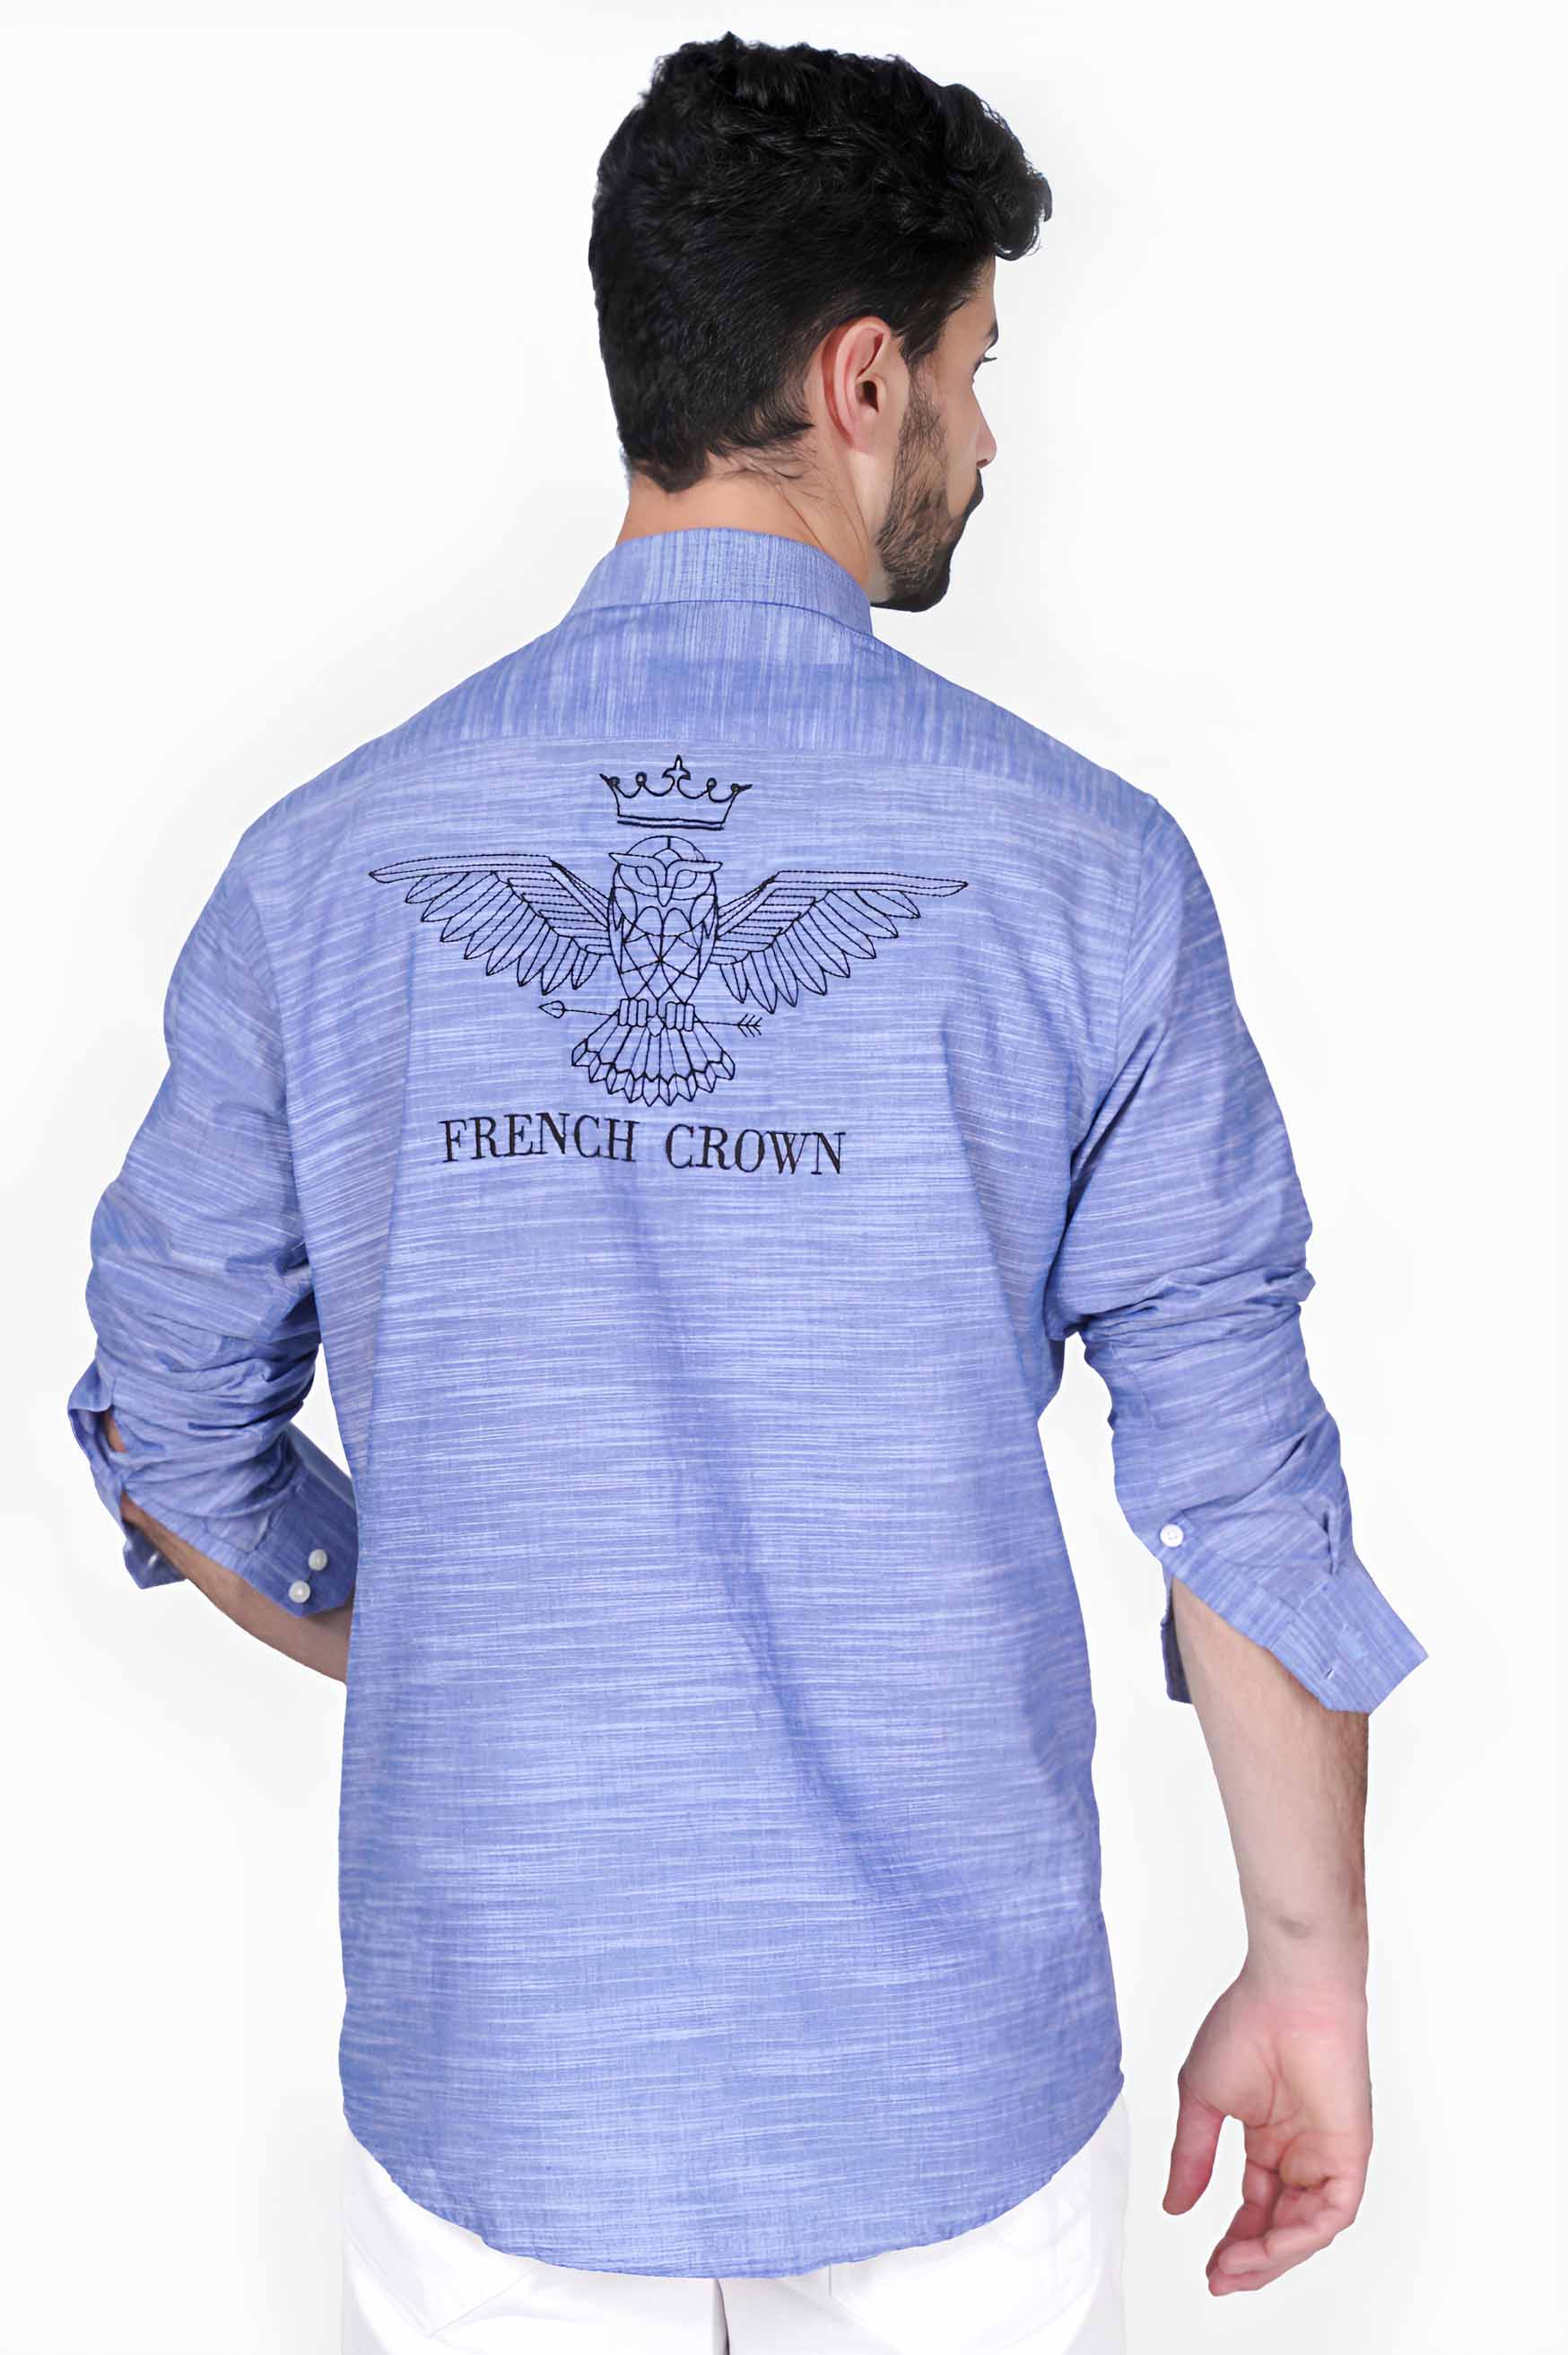 Periwinkle Blue Brand Name Embroidered Luxurious Linen Designer Shirt 5660-BD-E284-38, 5660-BD-E284-H-38, 5660-BD-E284-39, 5660-BD-E284-H-39, 5660-BD-E284-40, 5660-BD-E284-H-40, 5660-BD-E284-42, 5660-BD-E284-H-42, 5660-BD-E284-44, 5660-BD-E284-H-44, 5660-BD-E284-46, 5660-BD-E284-H-46, 5660-BD-E284-48, 5660-BD-E284-H-48, 5660-BD-E284-50, 5660-BD-E284-H-50, 5660-BD-E284-52, 5660-BD-E284-H-52